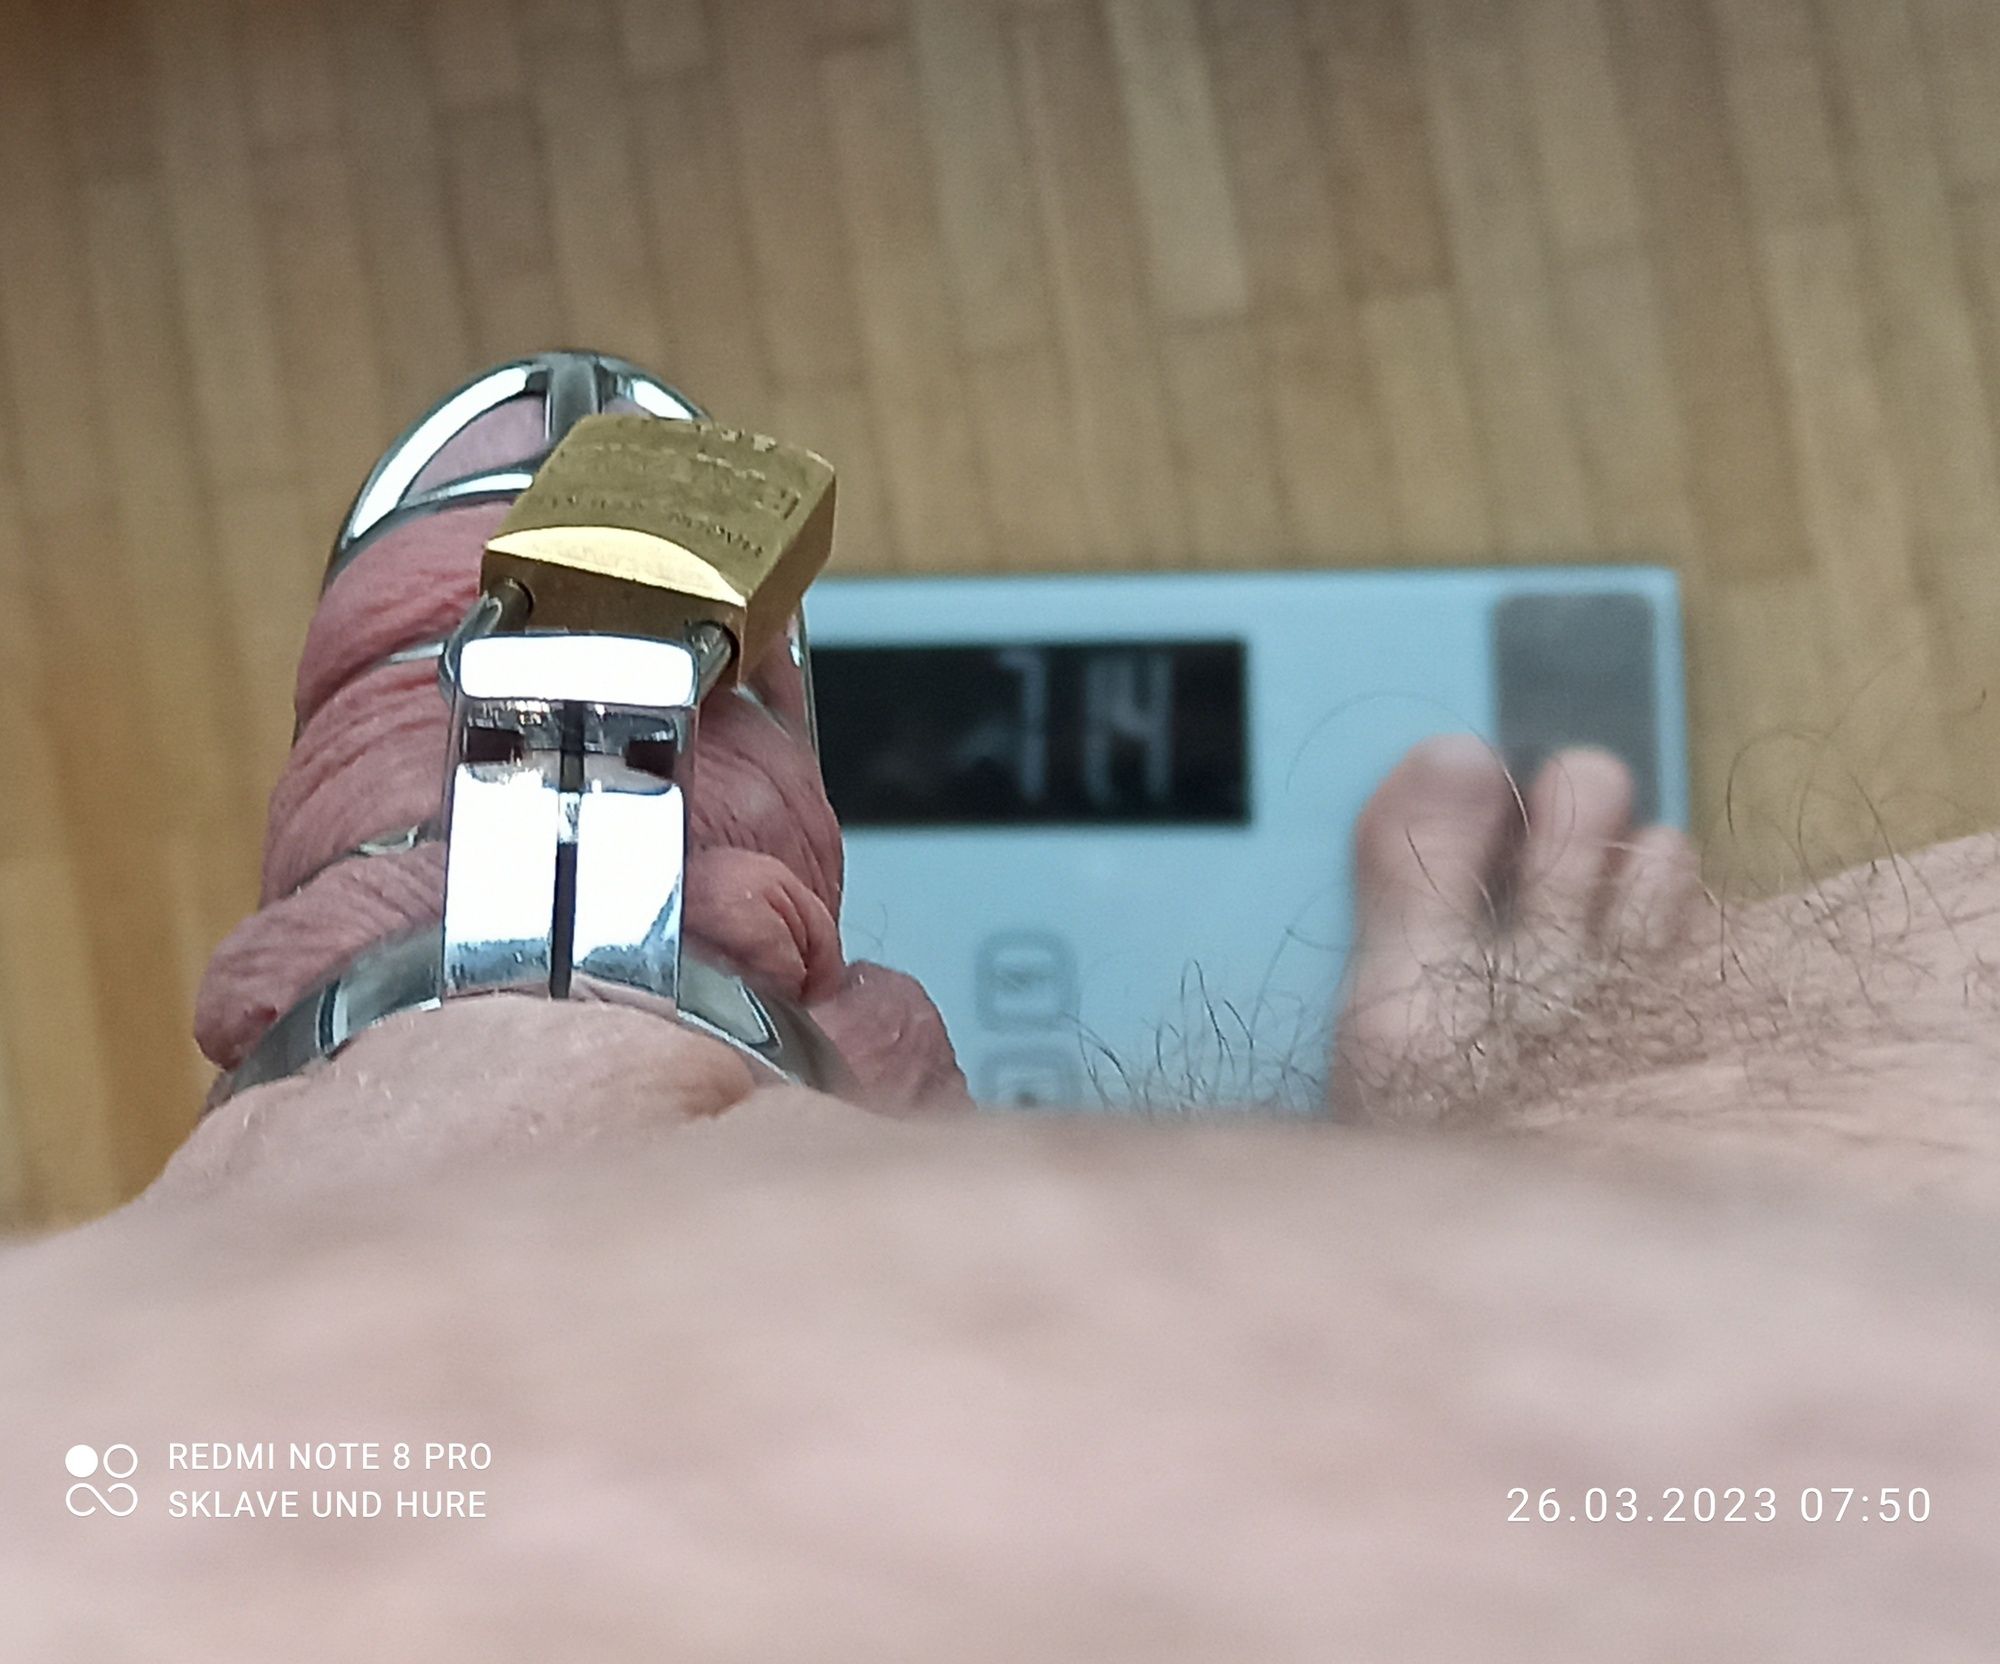 mandatory weighing and cagecheck of 26.03.2023